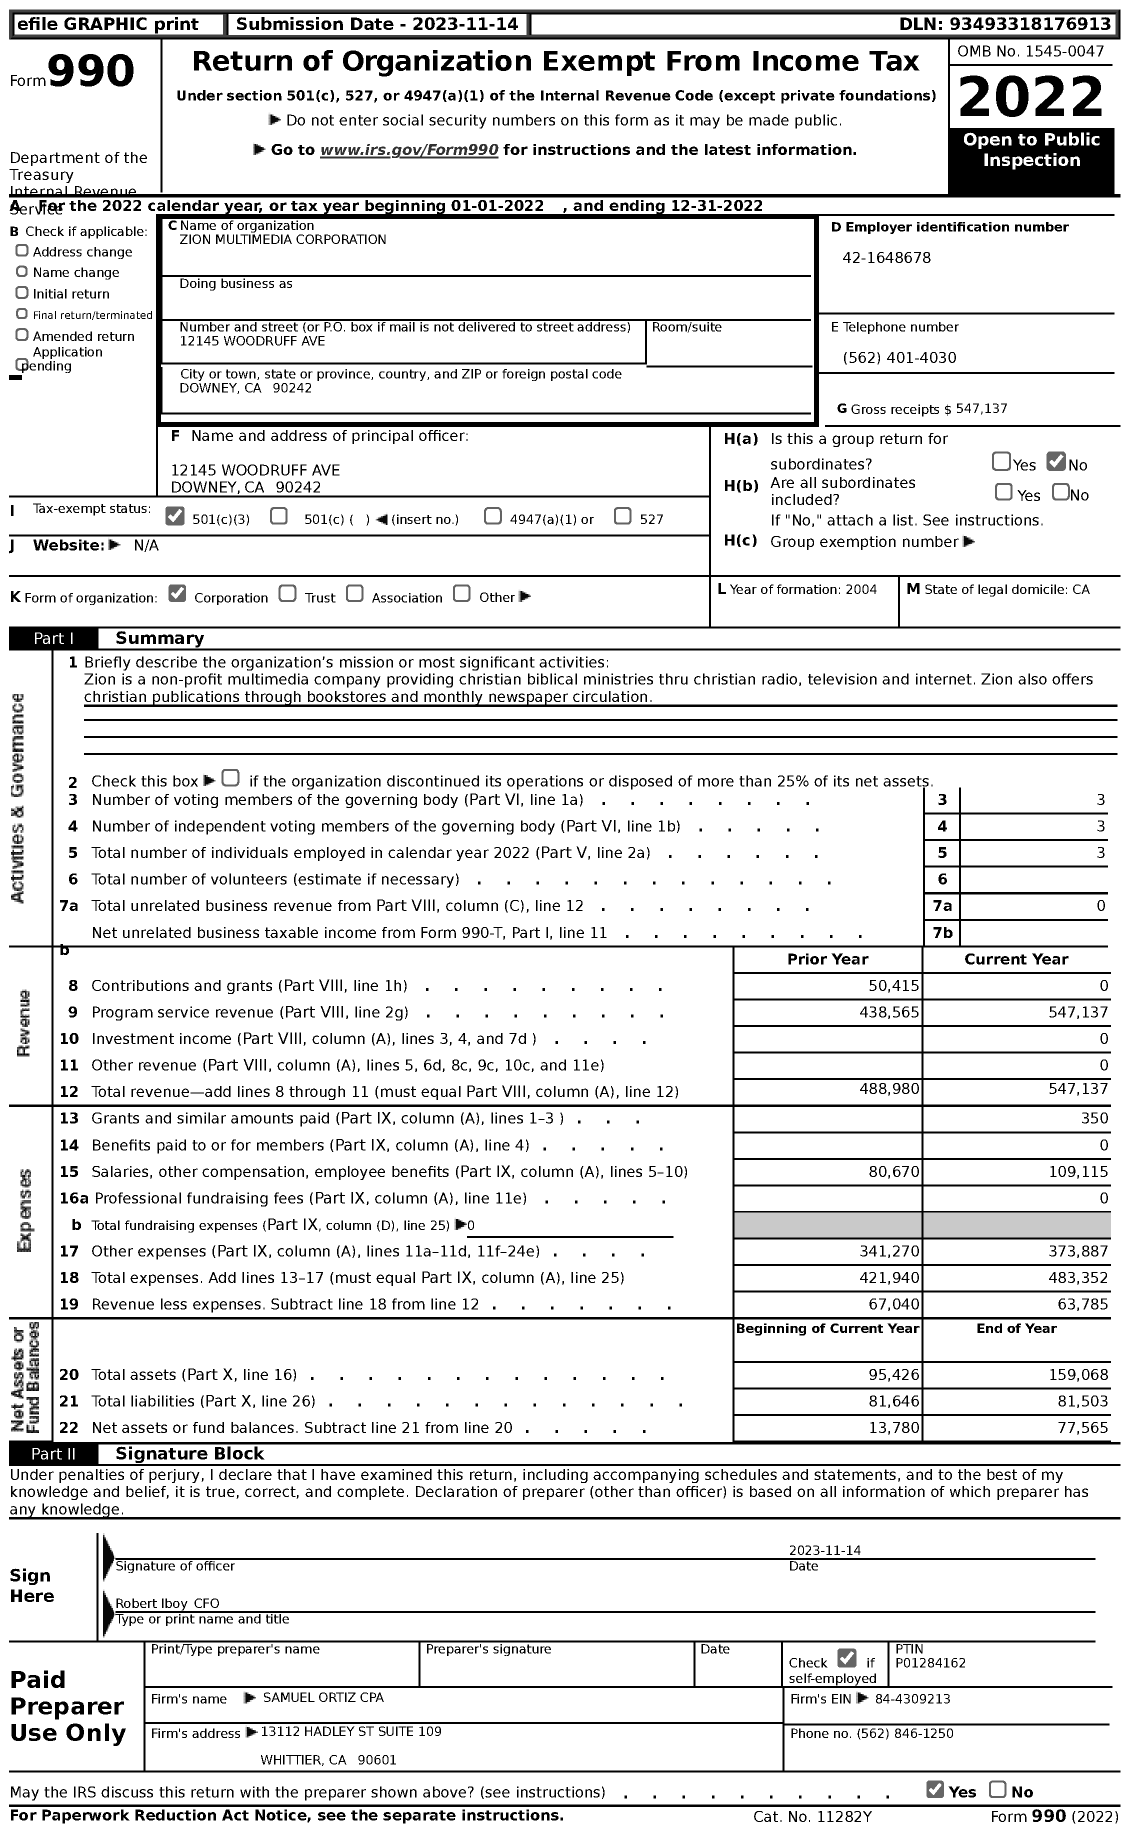 Image of first page of 2022 Form 990 for Zion Multimedia Corporation